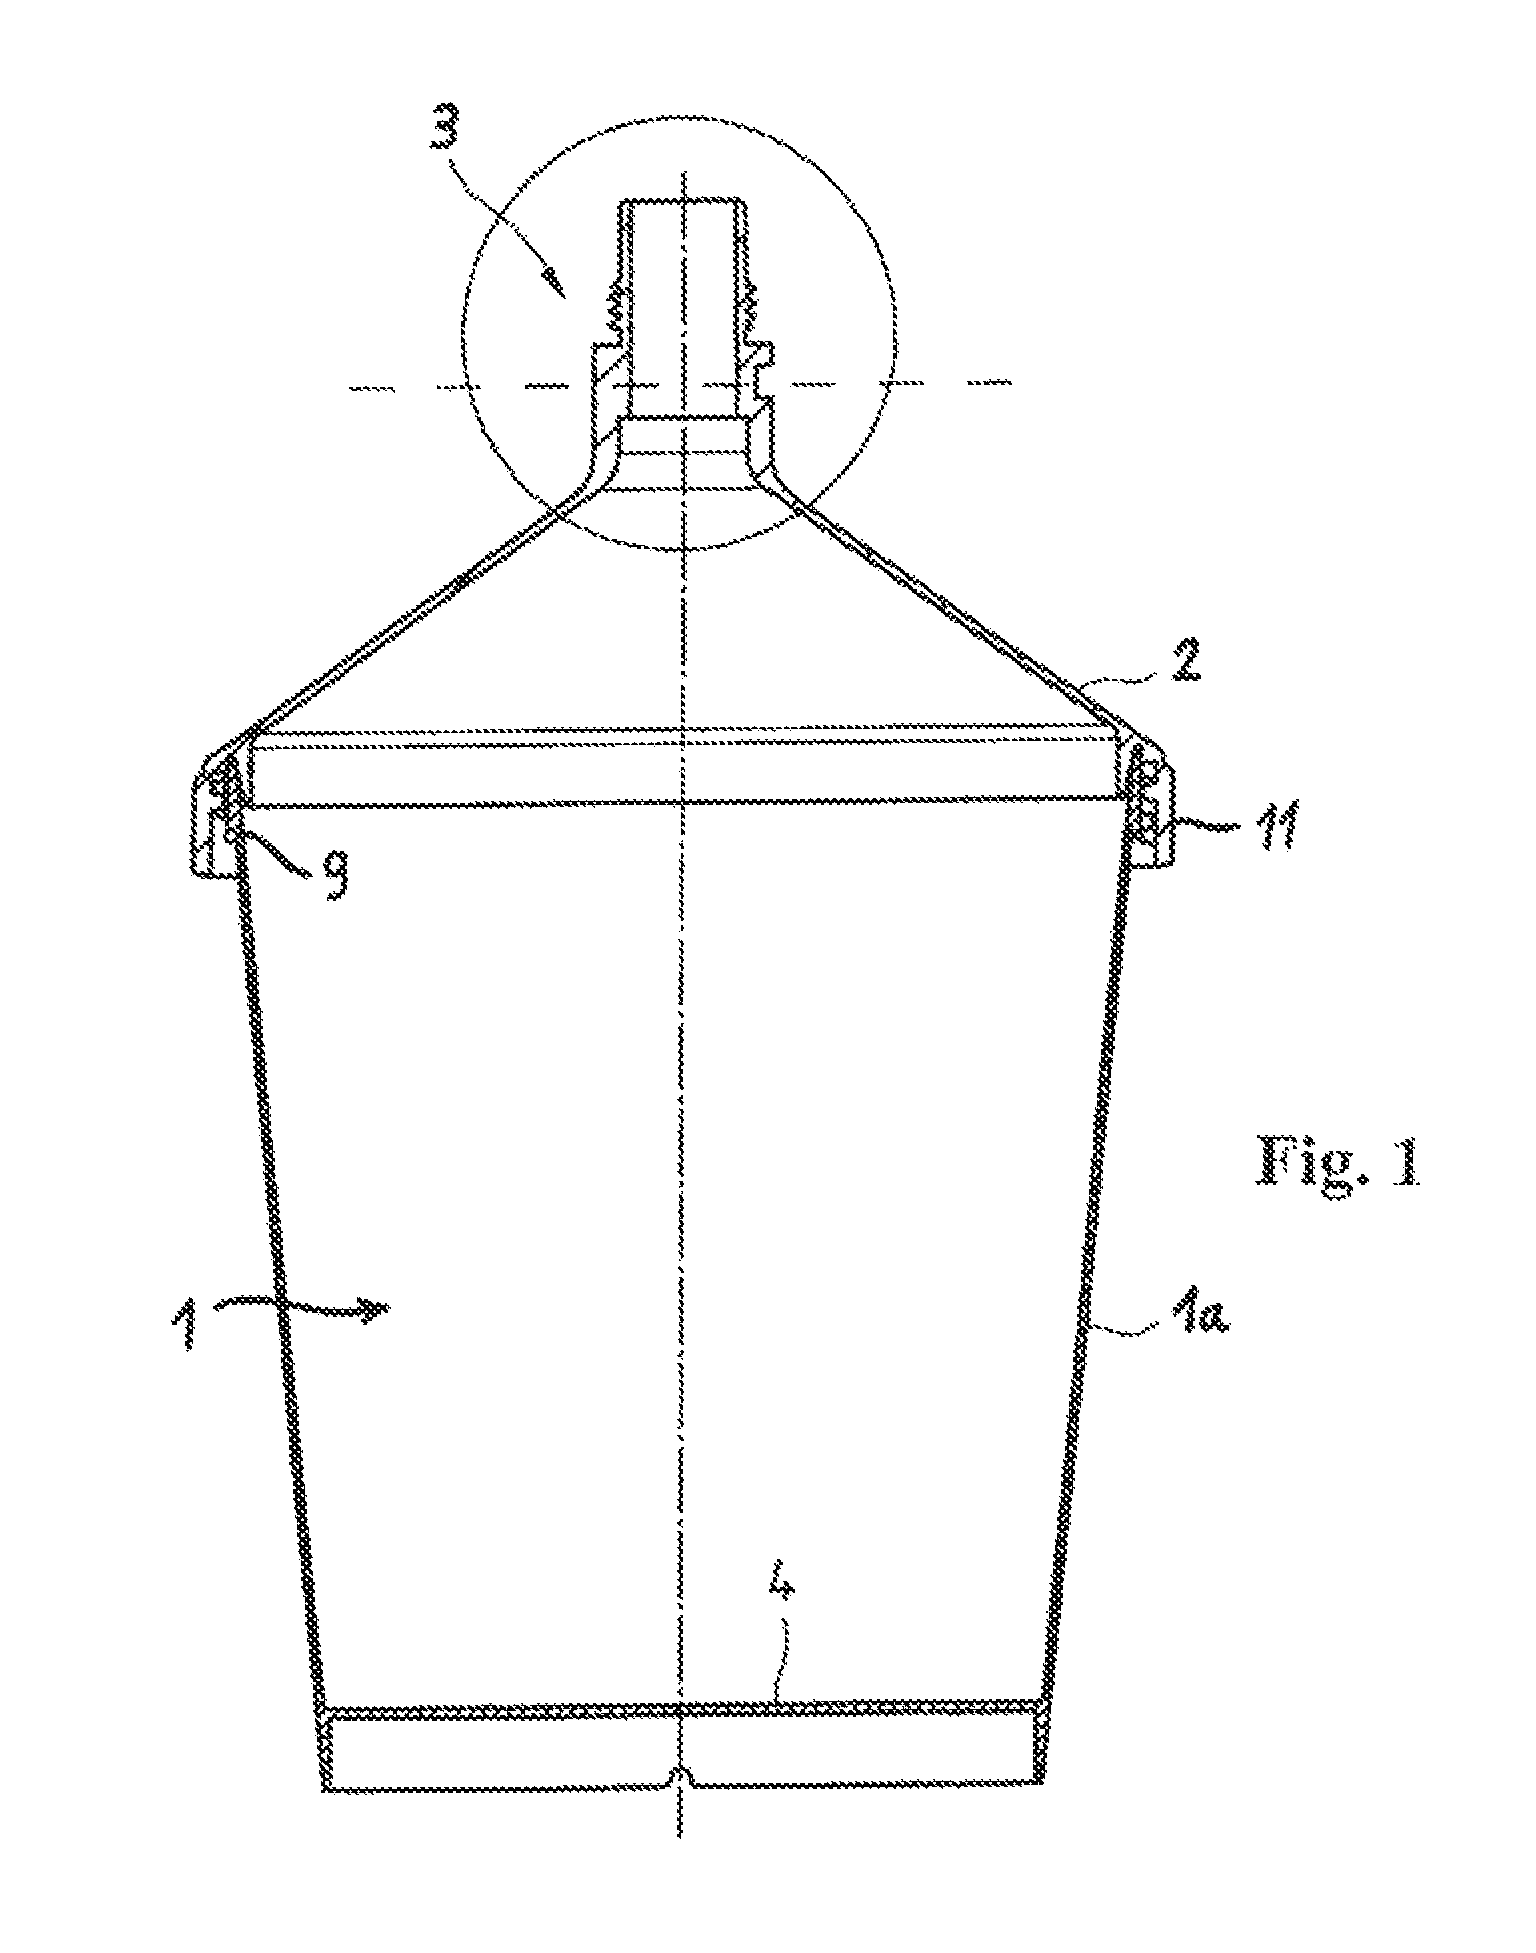 Gravity cup for a paint sprayer